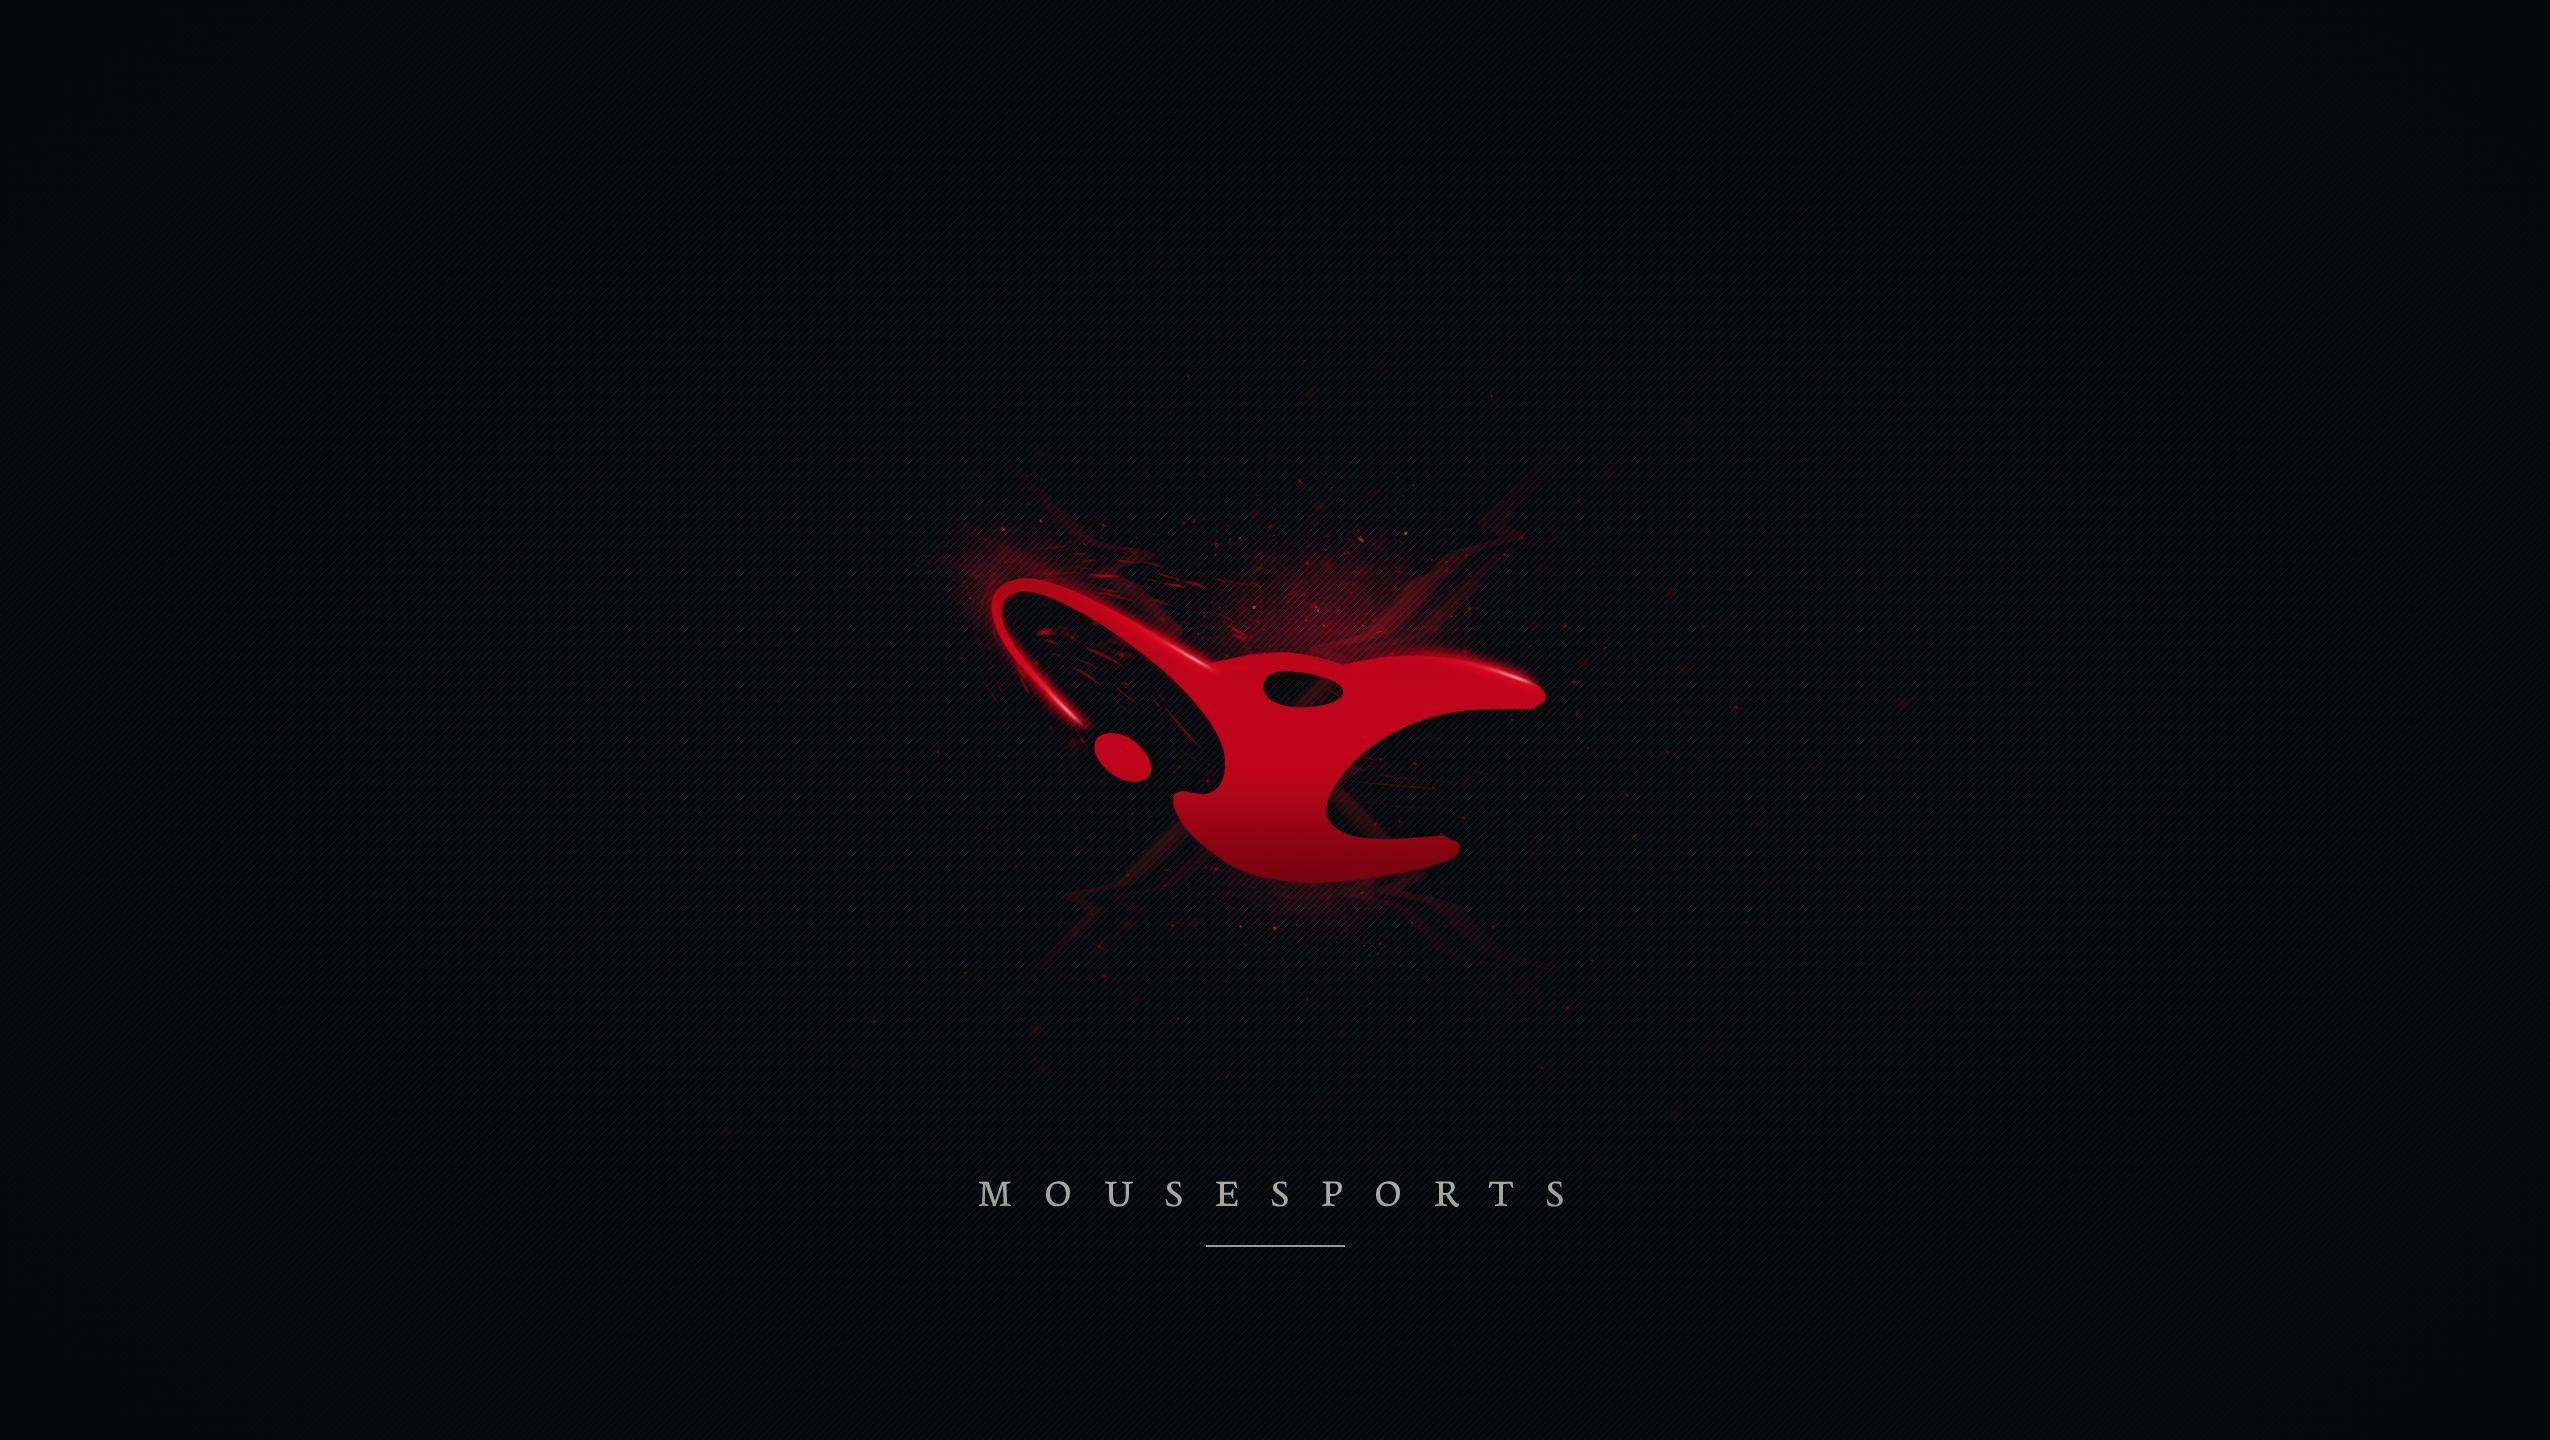 Mousesports Logo - Mousesports Wallpaper Group (32+), Download for free